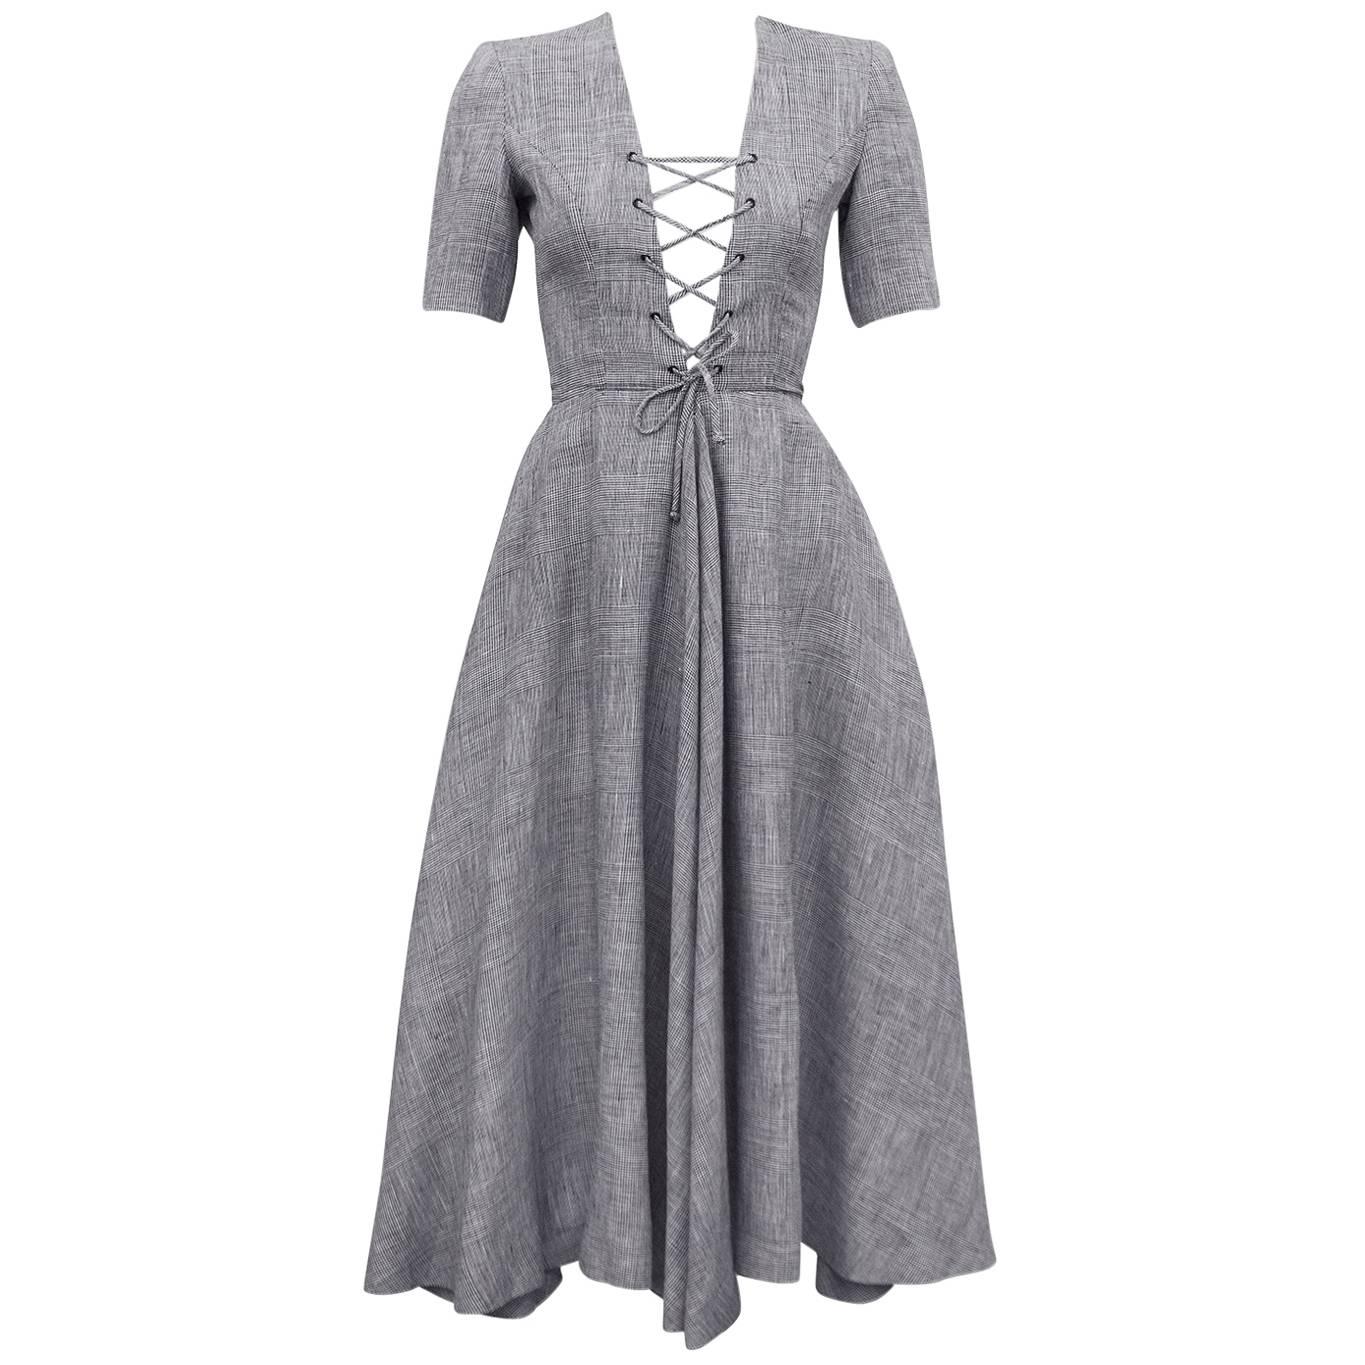 Lanvin Gray Lace Up Front Day Dress, 1970s 